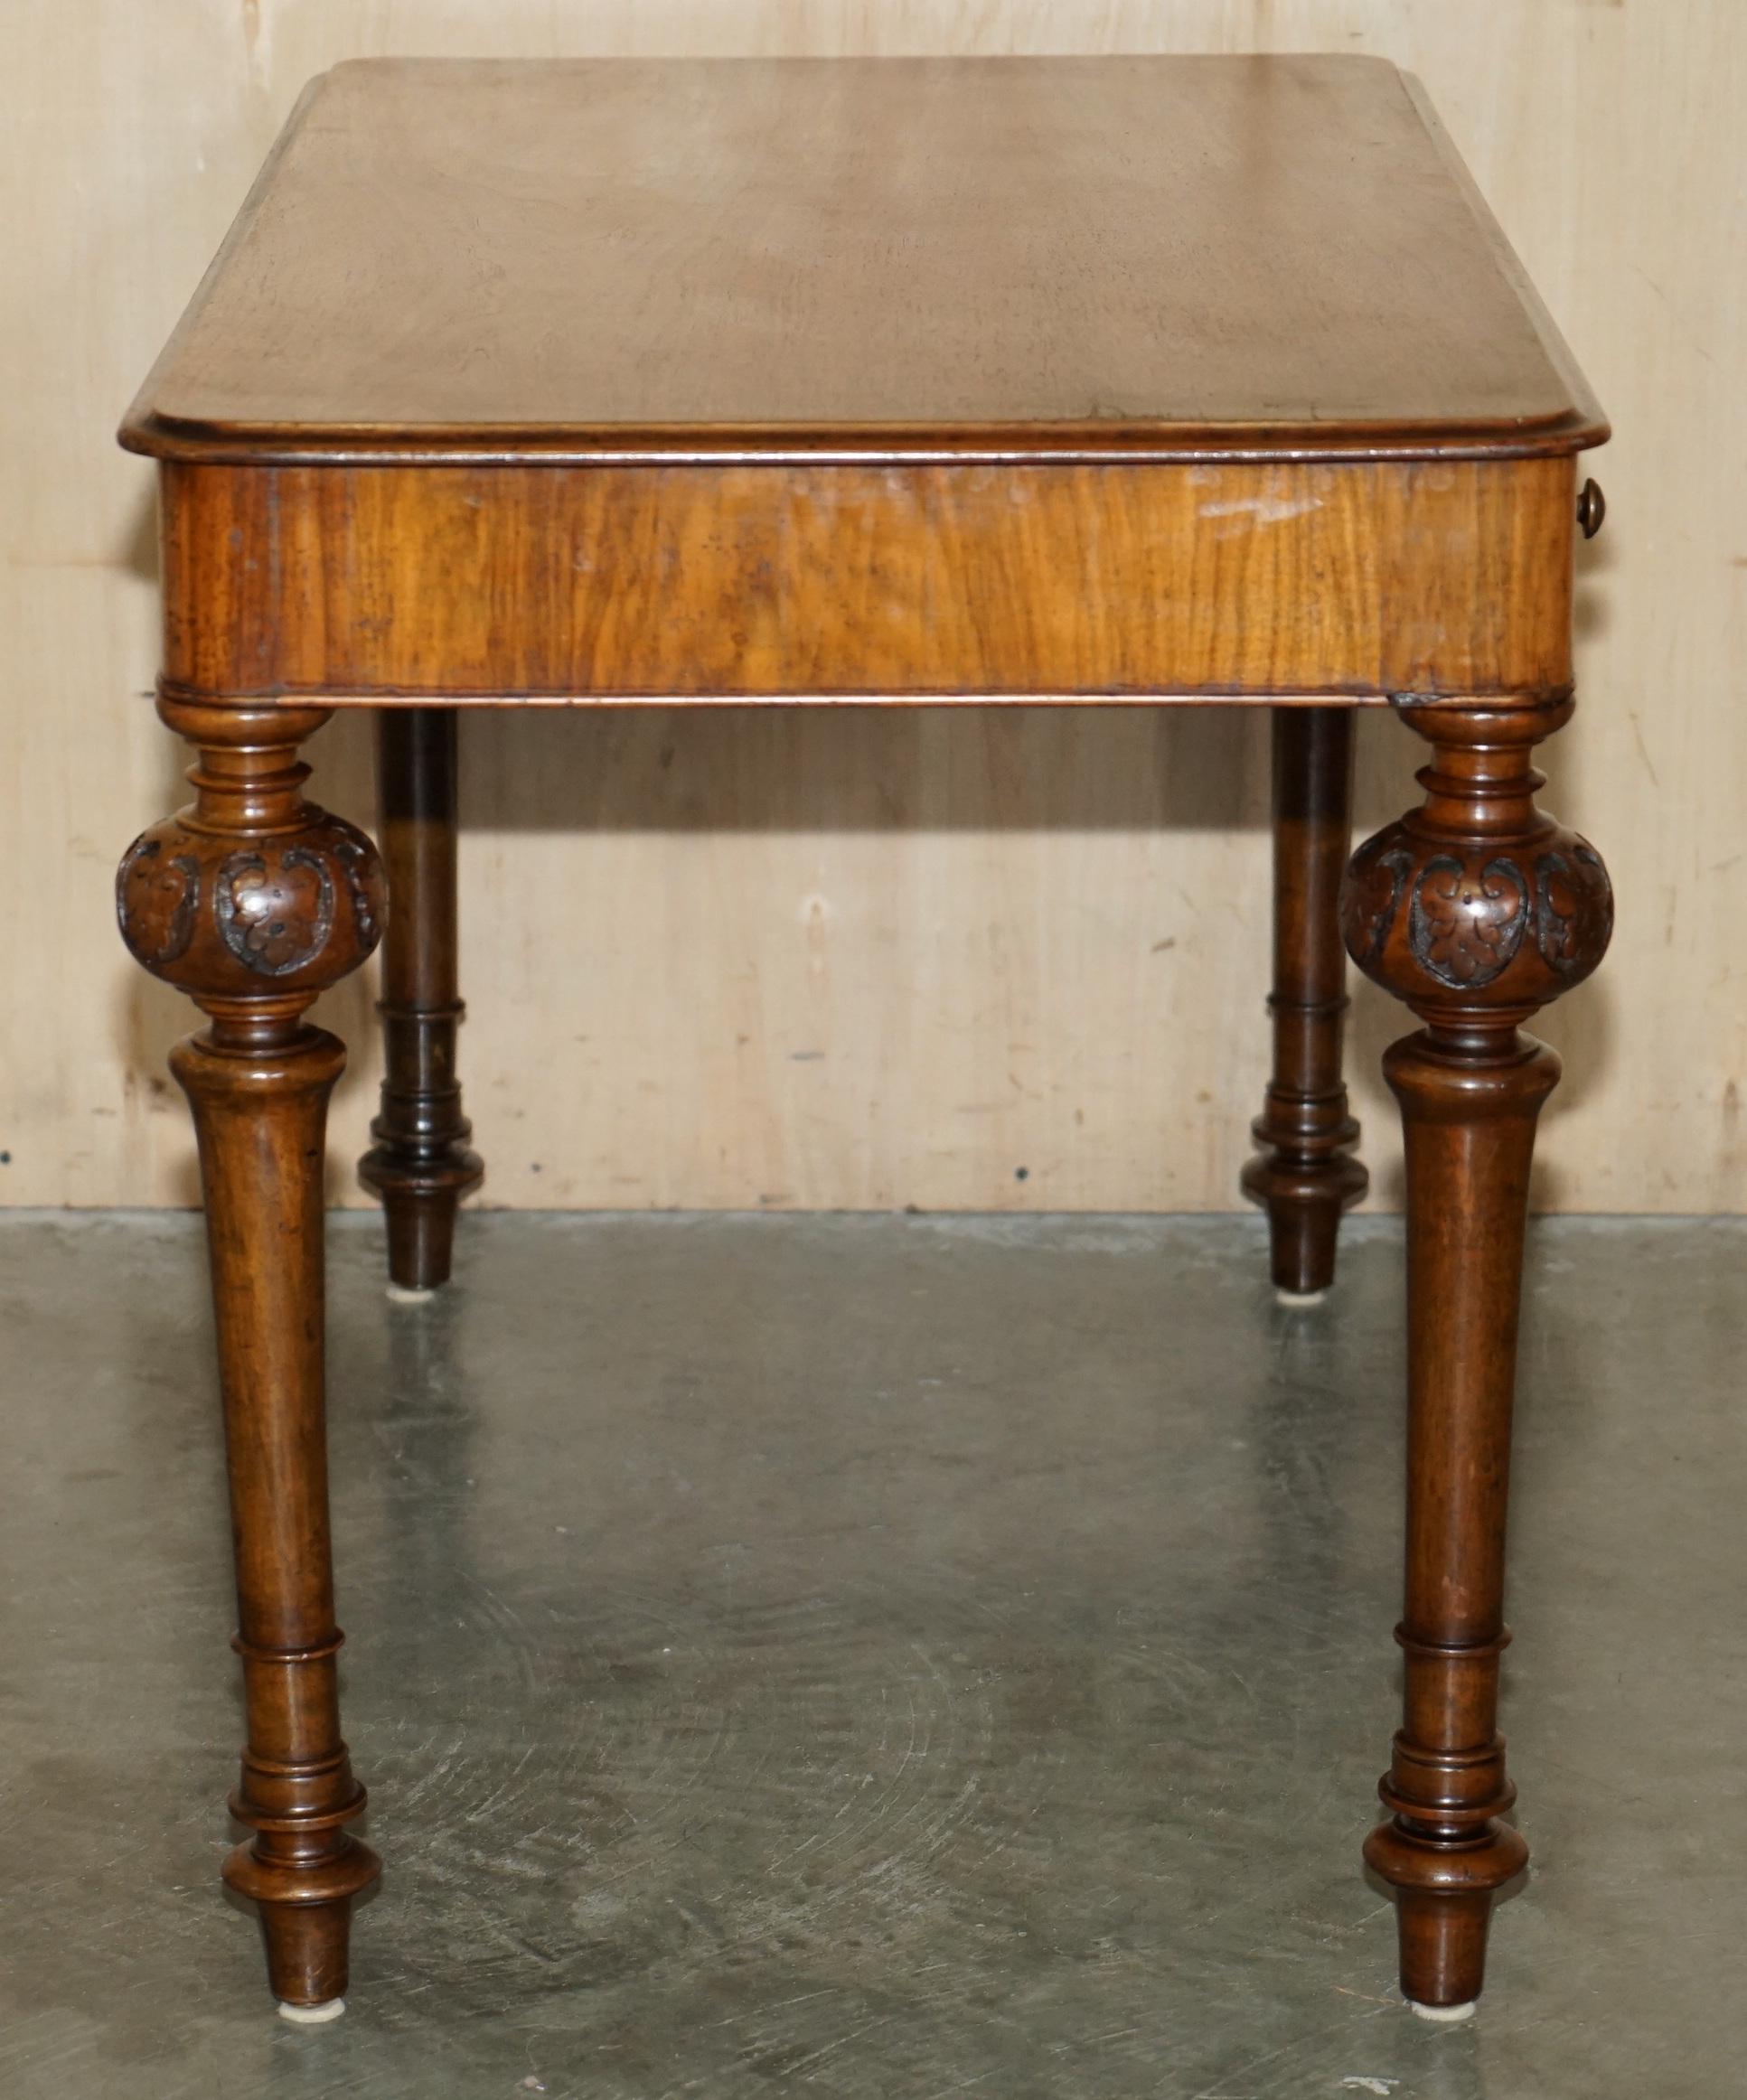 EXQUISITE SMALL WILLIAM IV CIRCA 1830 HARDWOOD WRiTING TABLE DESK CARVED LEGS For Sale 6